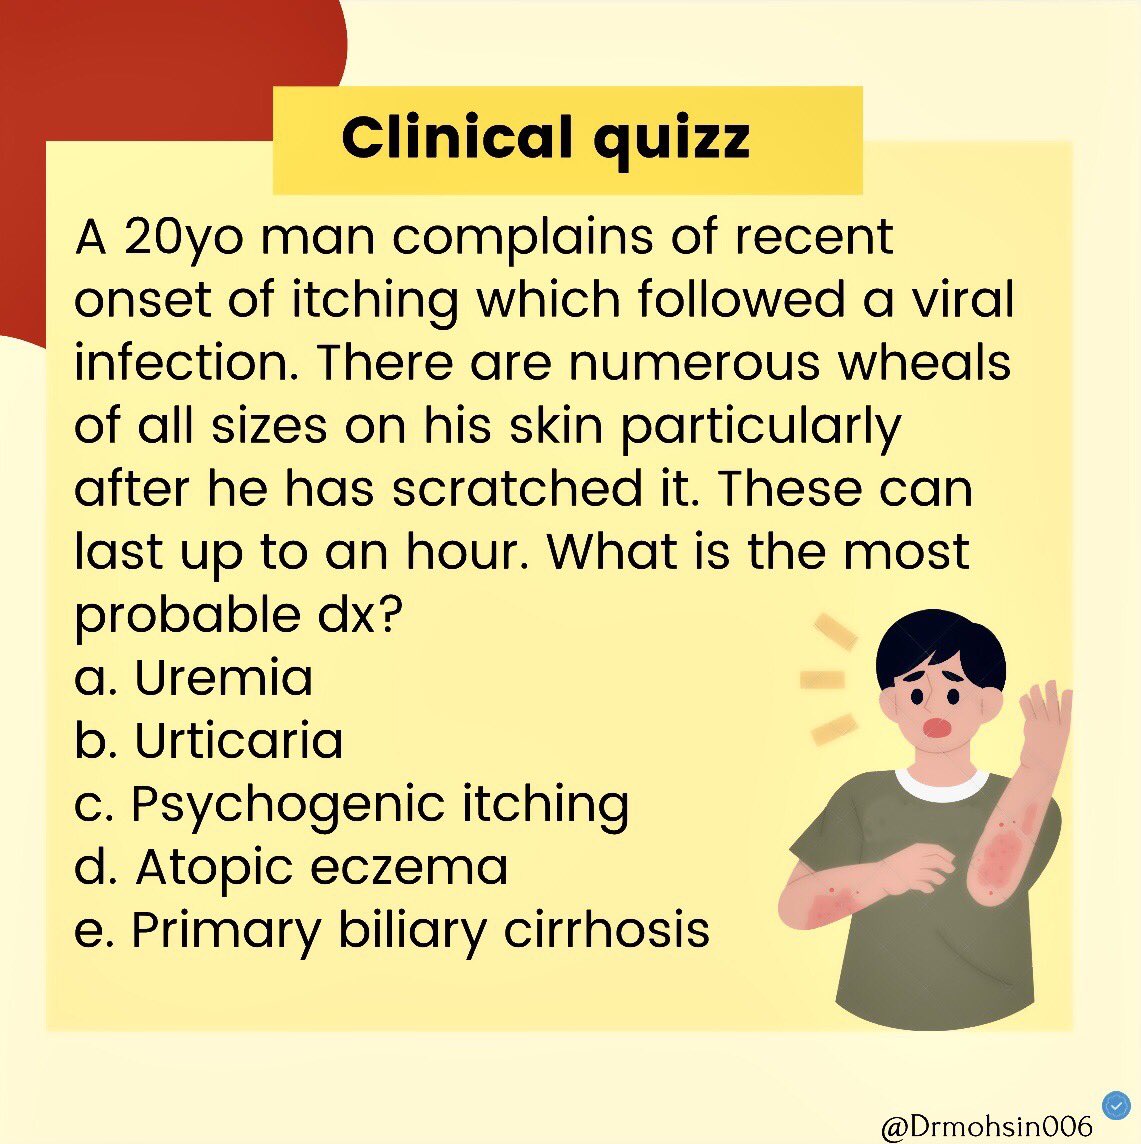 Can you sniff out the right answers to our  quiz? Comment below and let’s see if you're an  expert!
#MedEd #MedX